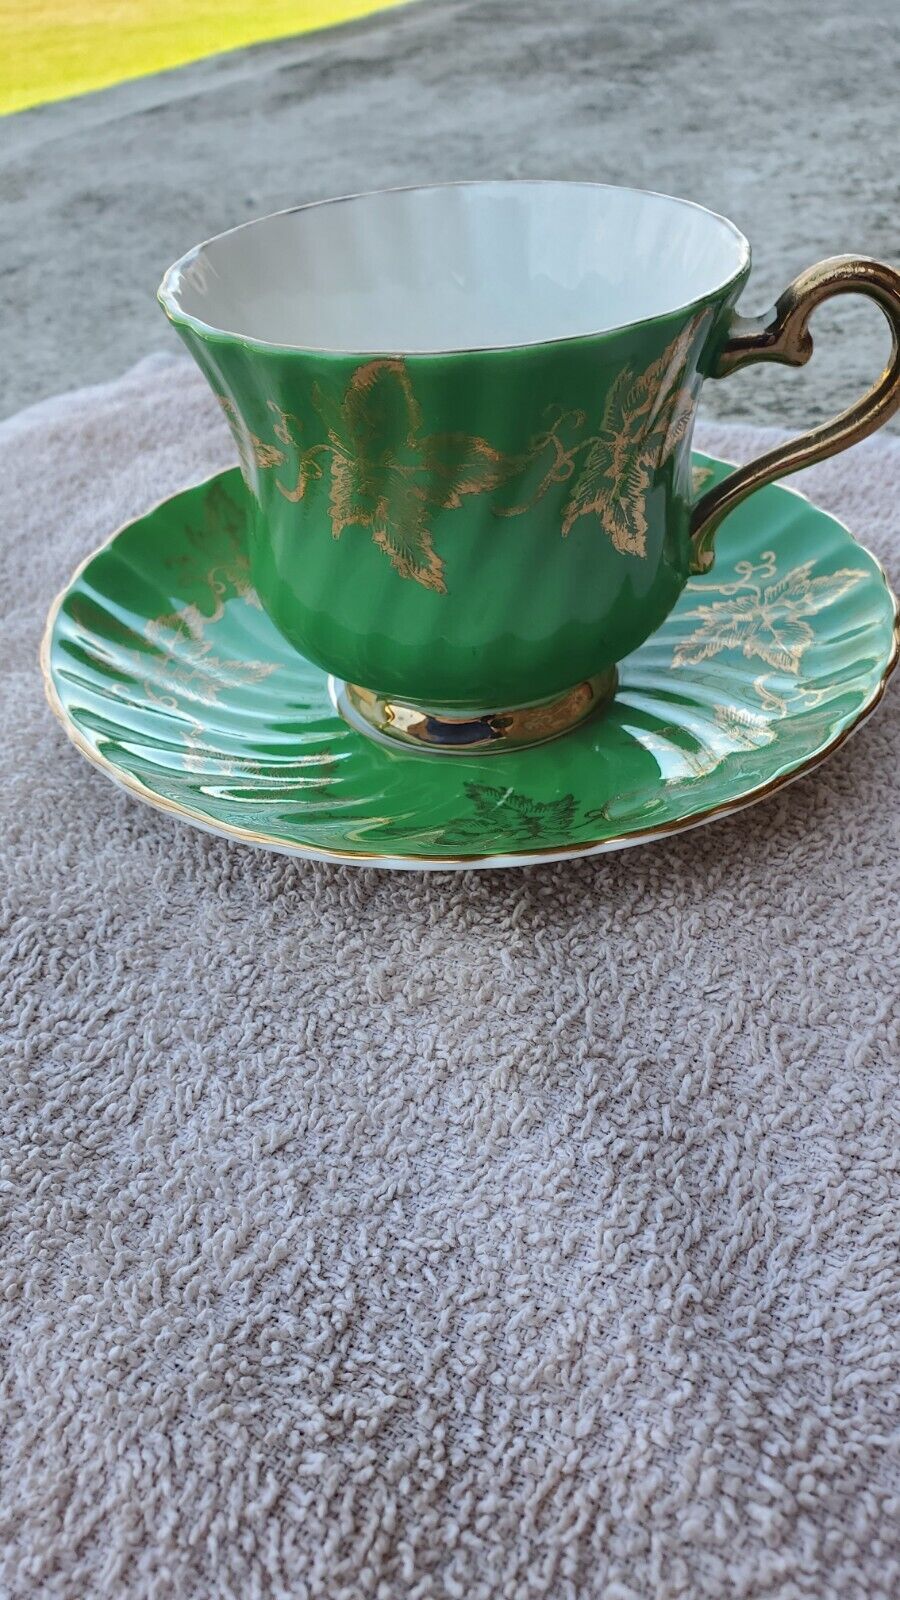 Vintage H&M Sutherland Bone China Tea Cup And Saucer Green With Gold